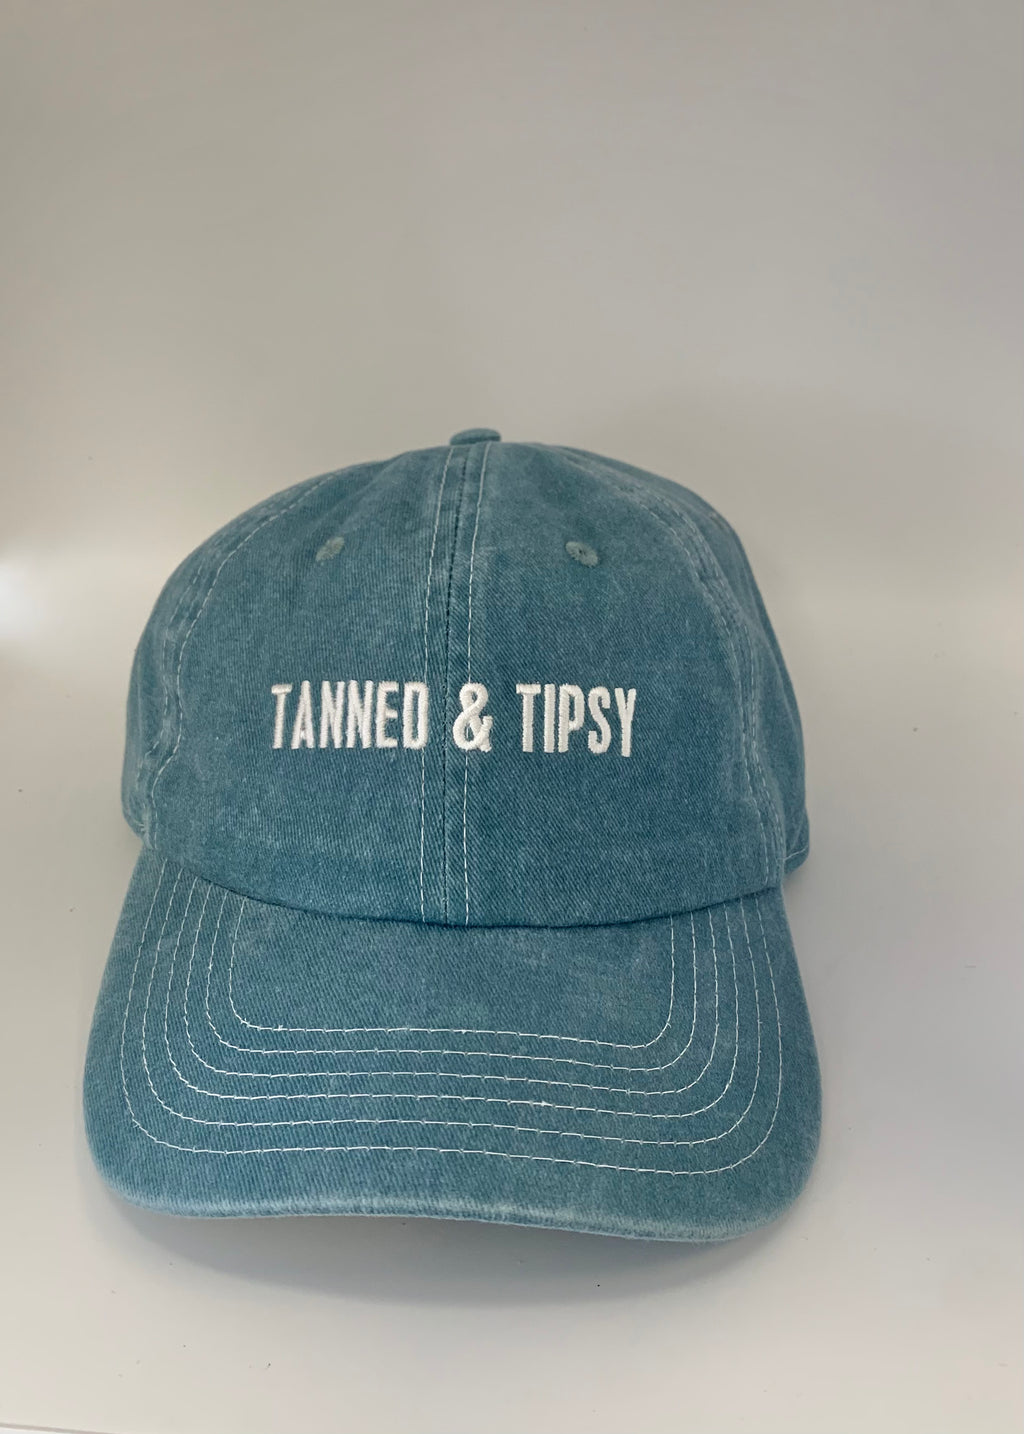 Tanned & Tipsy Hat